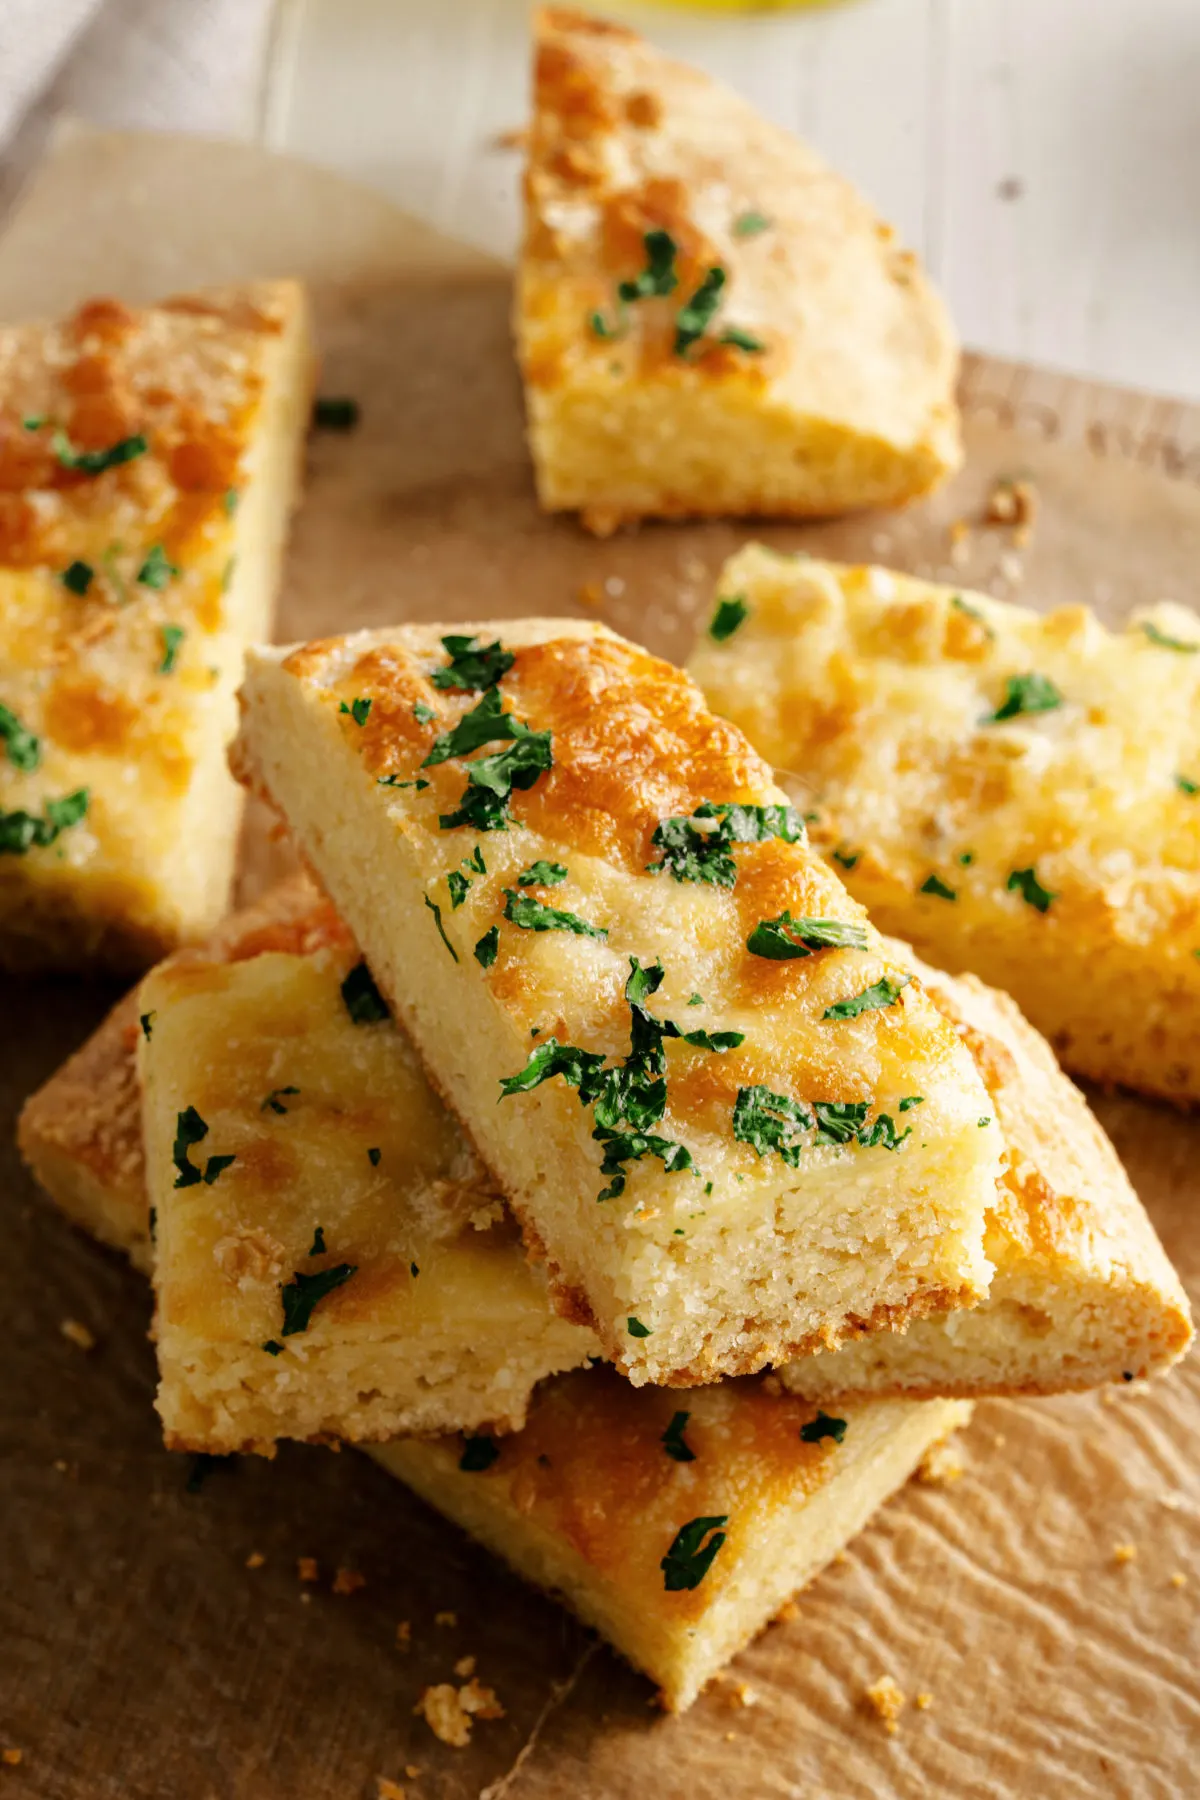 Garlic bread cut into pieces and stacked on each other.